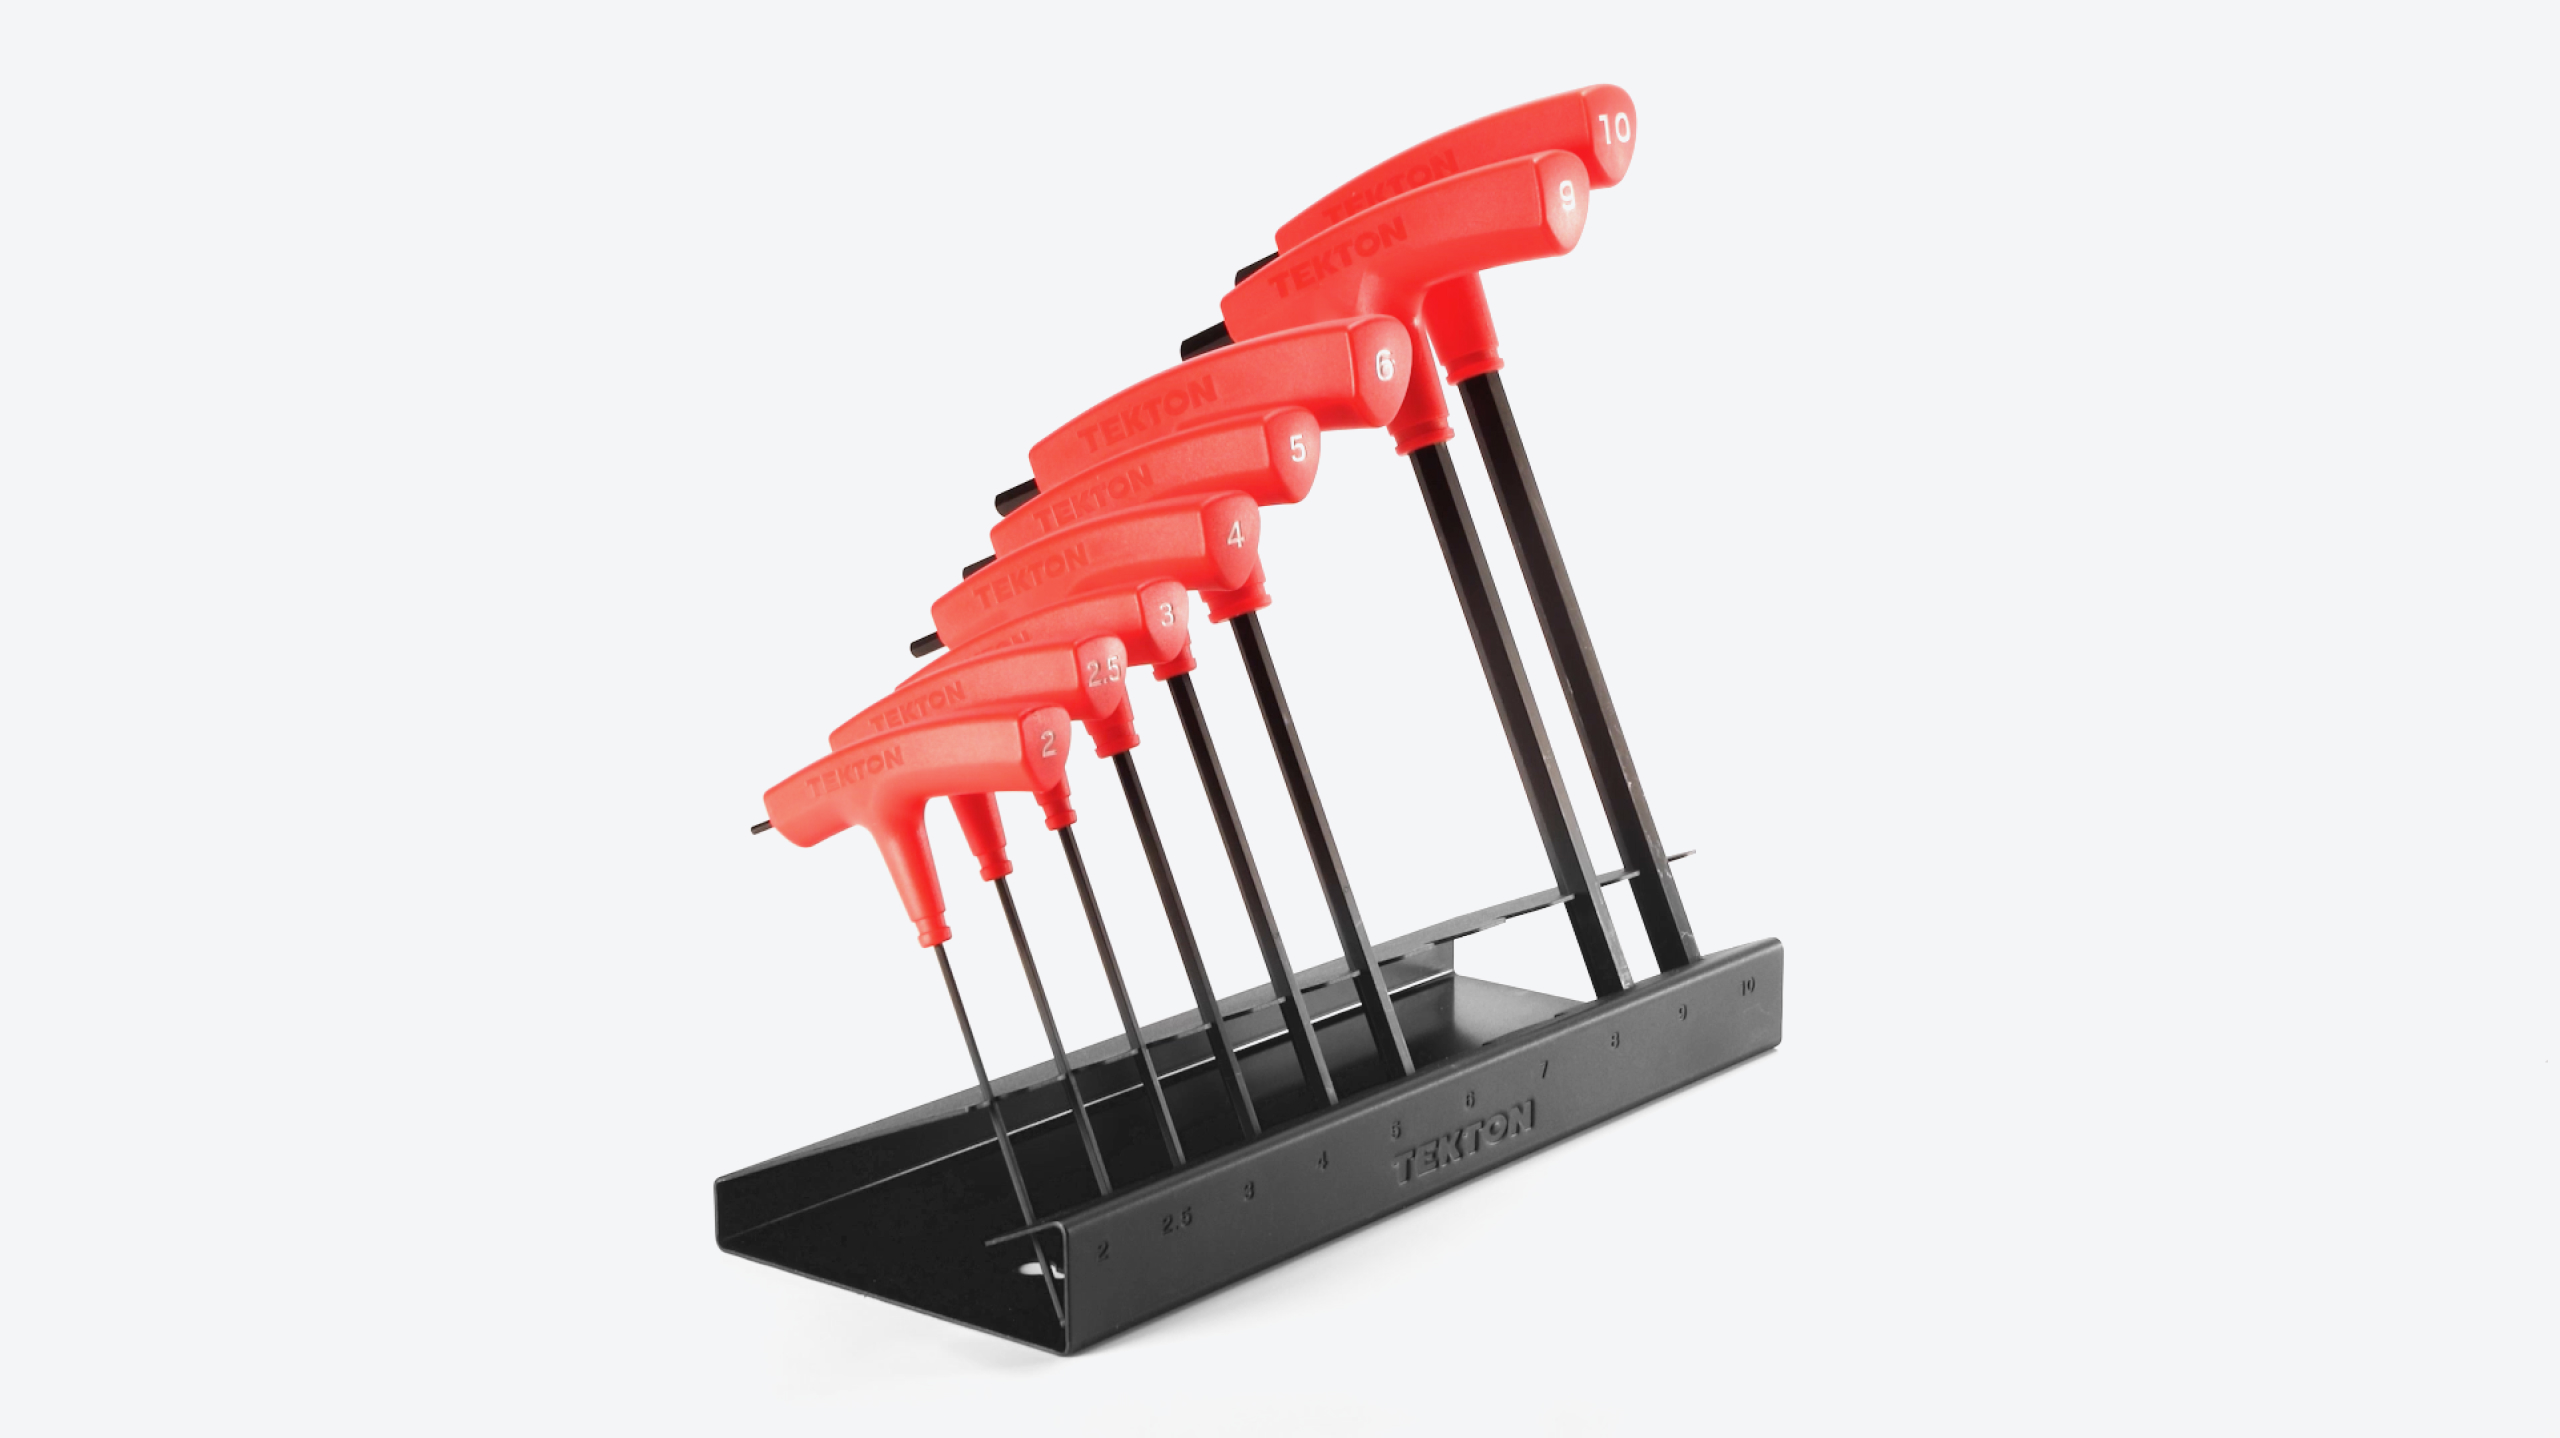 13-Piece T-Handle Hex Key Set (Star) with Stand | TEKTON